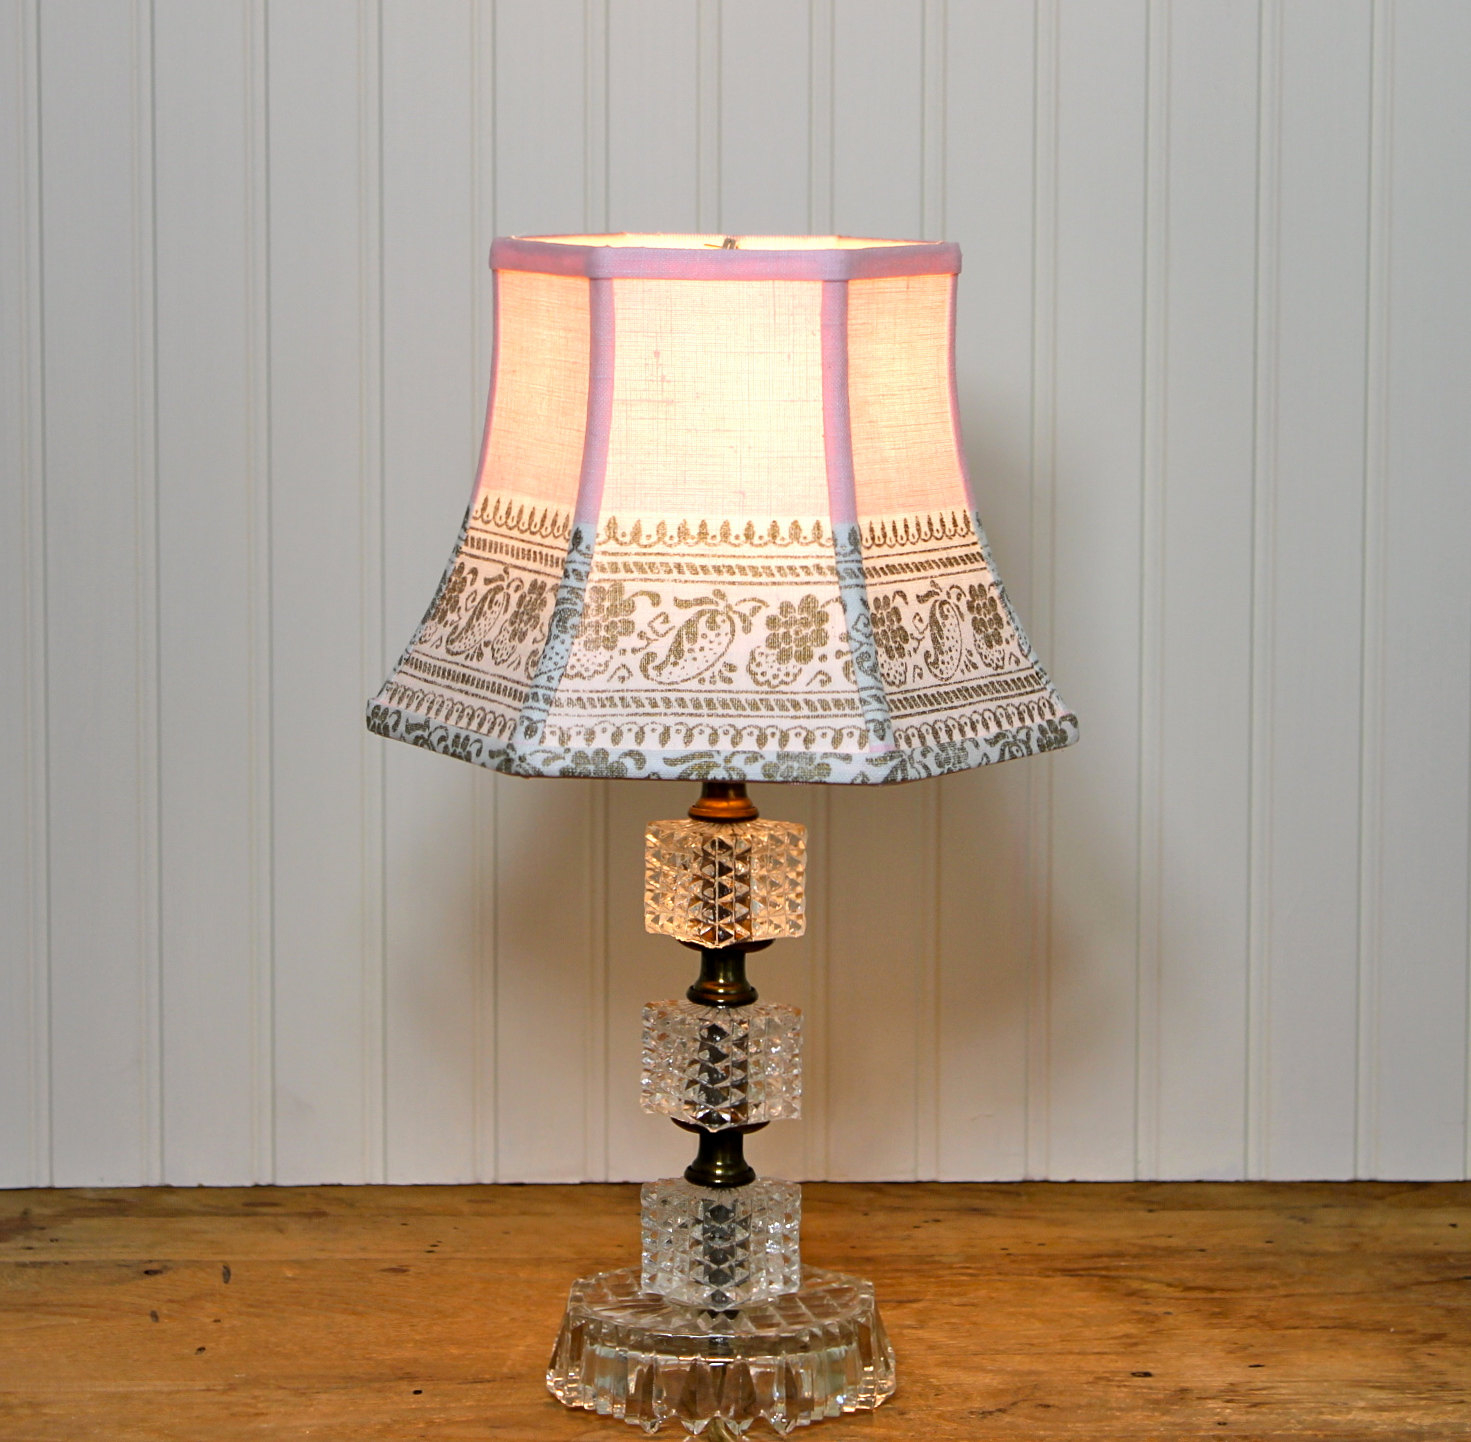 Shabby Chic Lamp Shades You Ll Love In, Vintage Table Lamp Shades